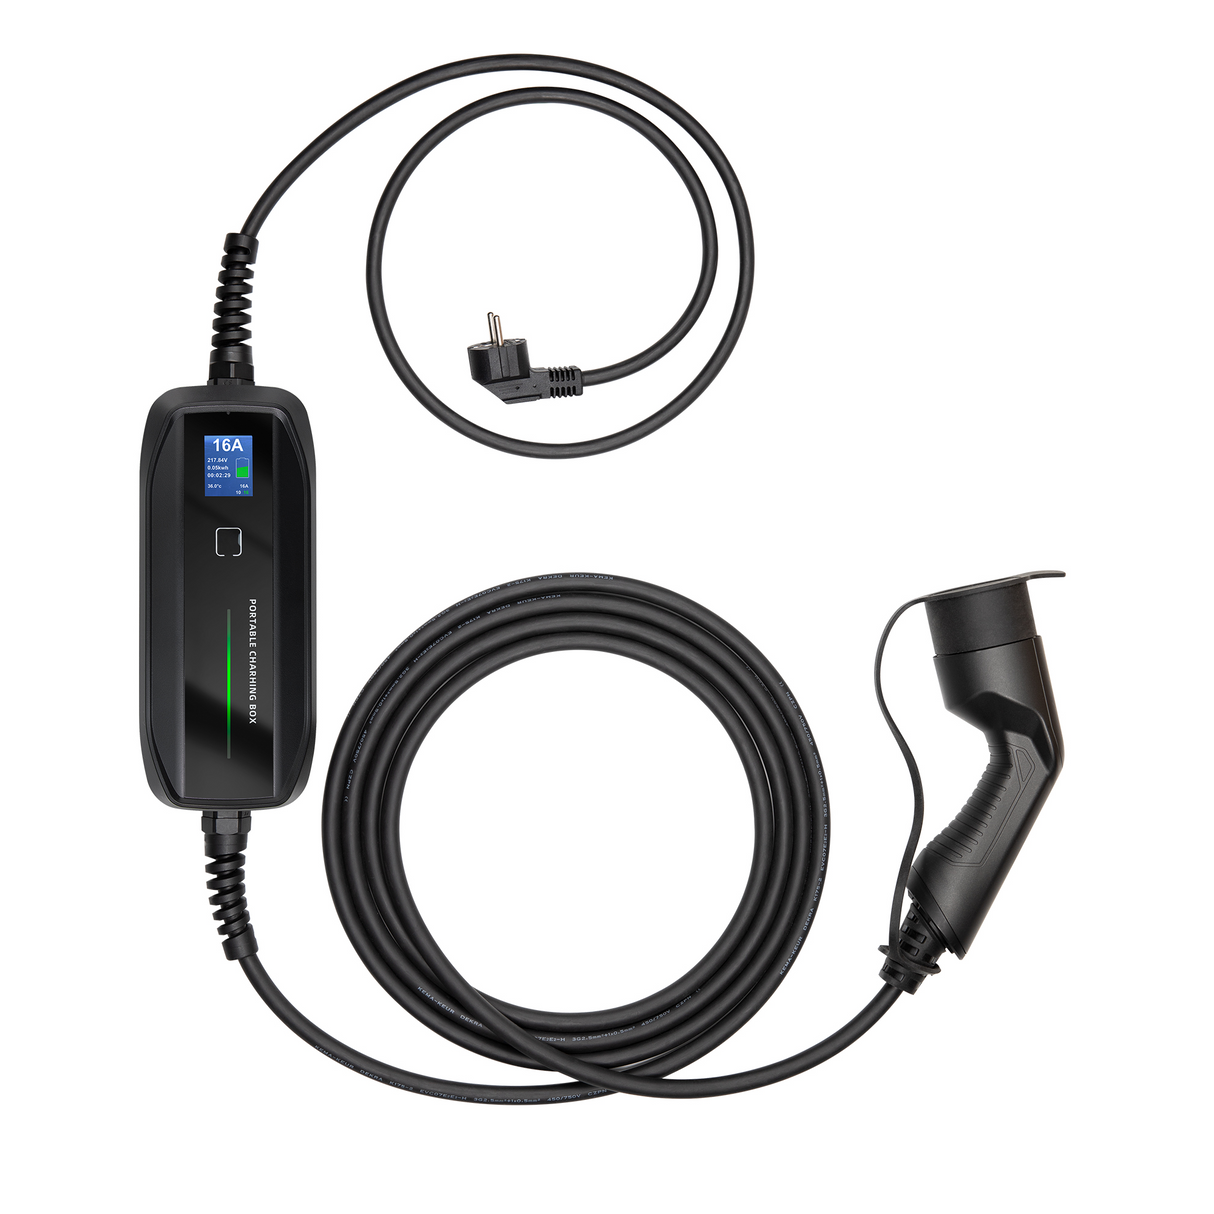 Mobile Charger Cupra Formentor - LCD Black Type 2 to Schuko